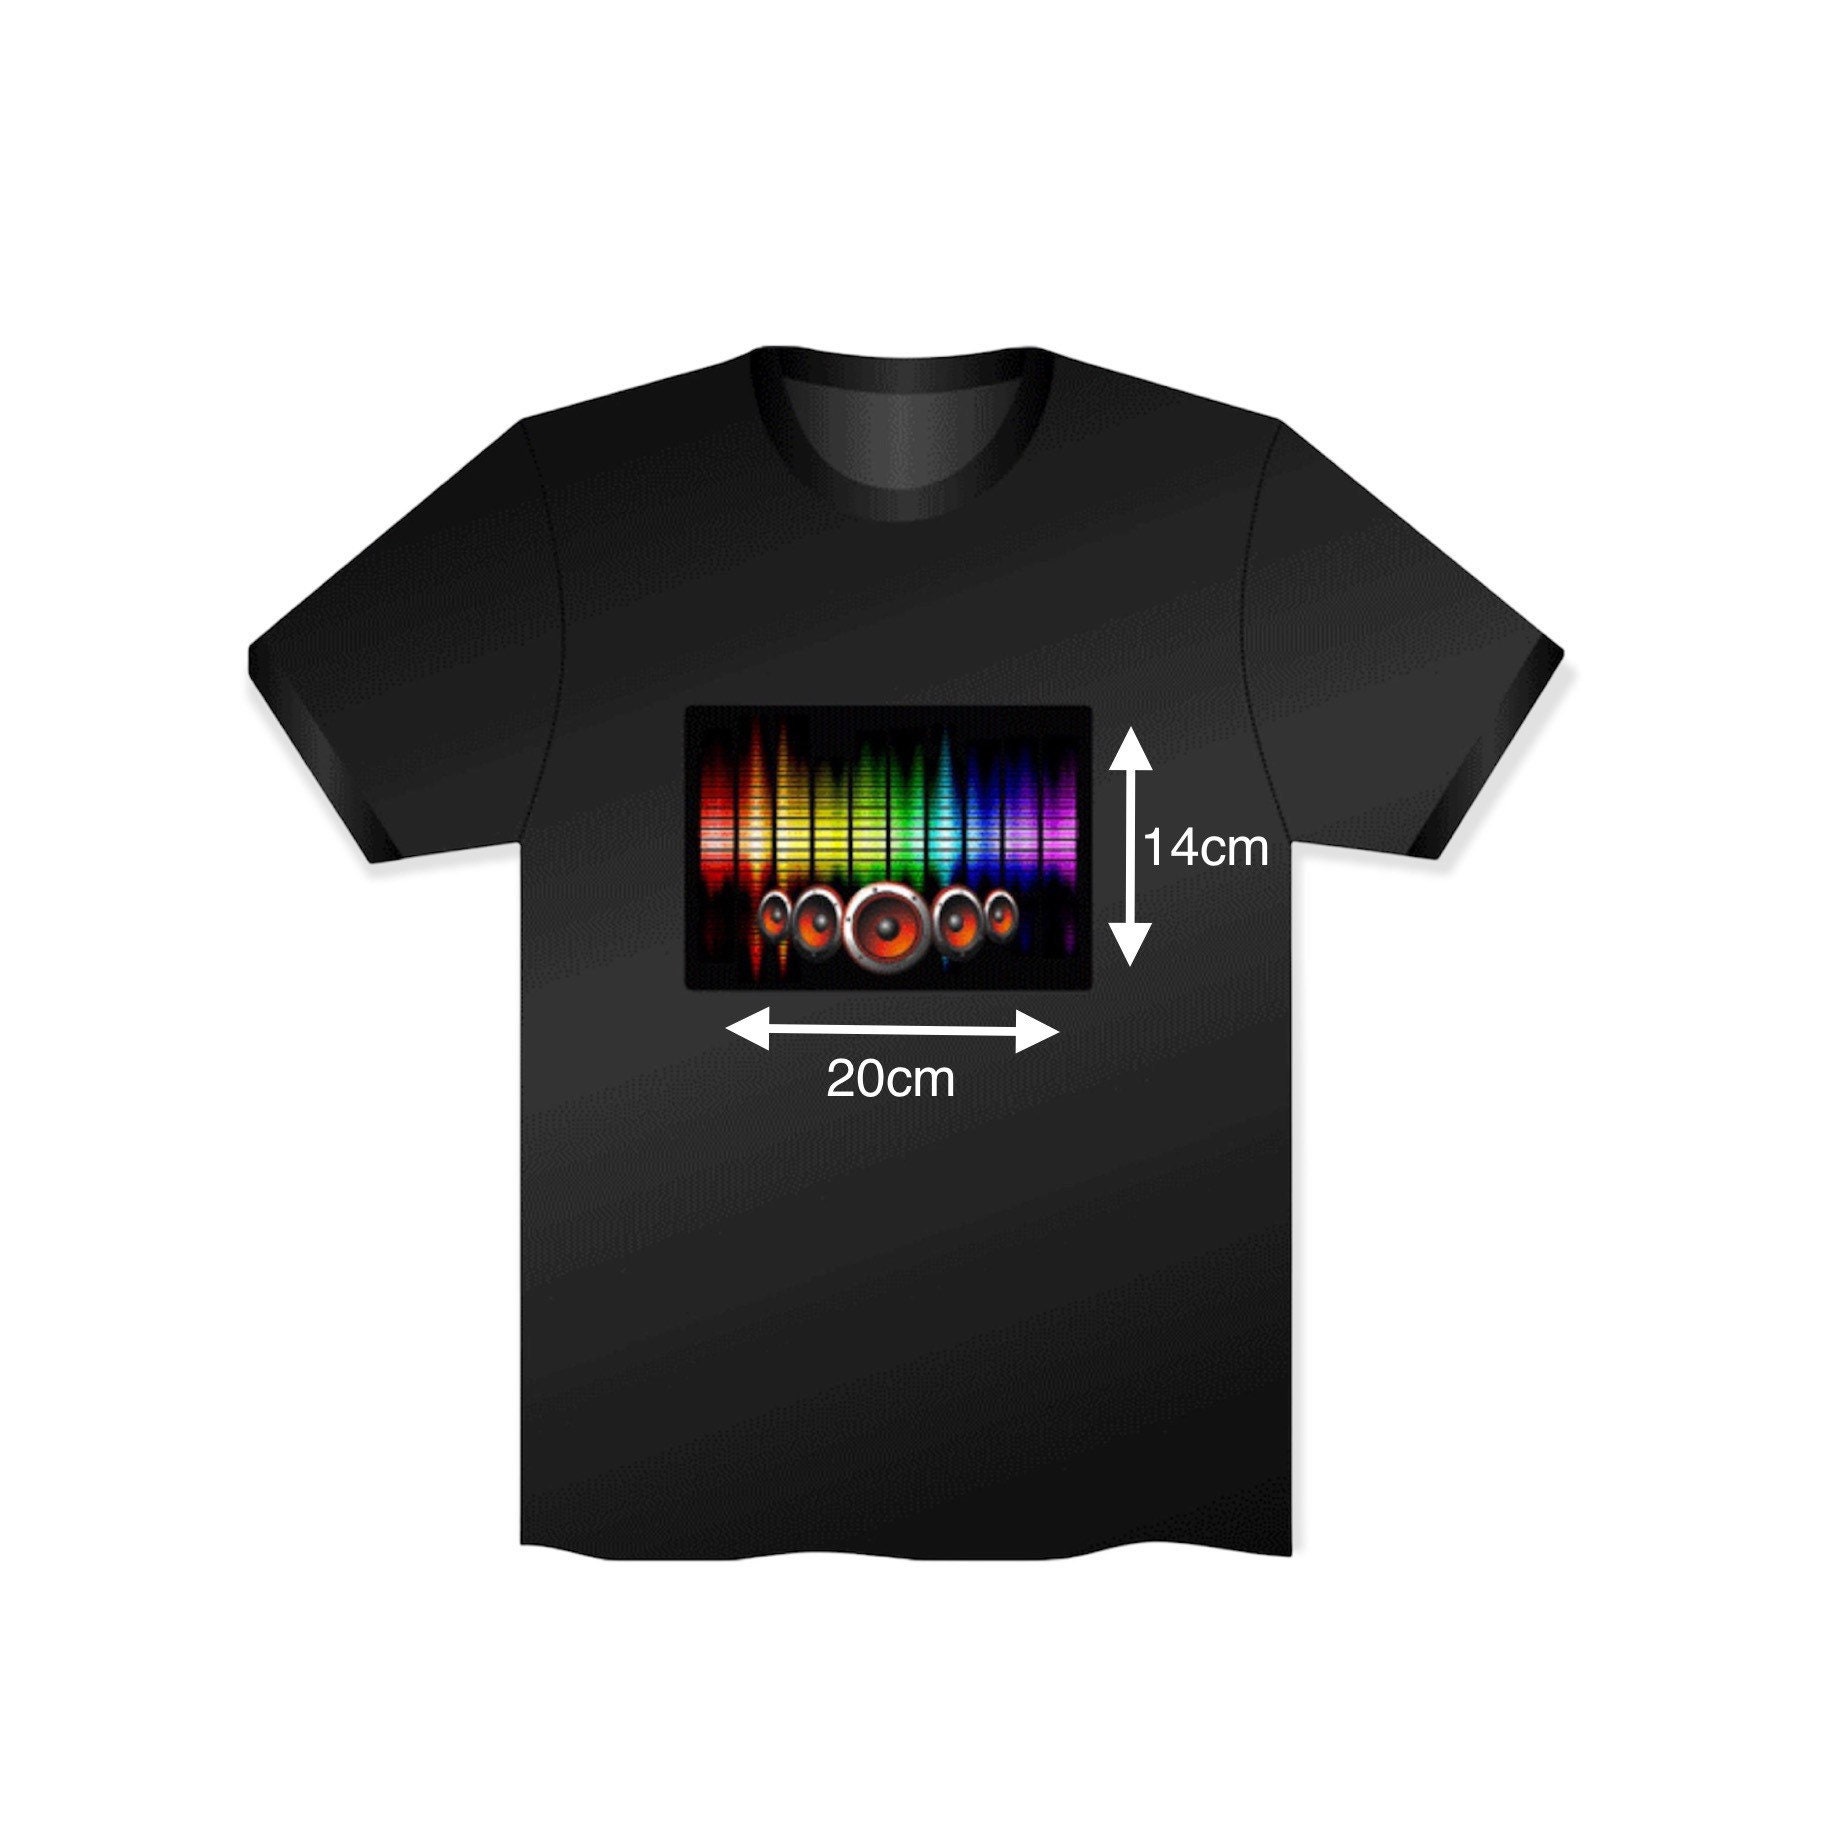 It’s Moving With Rhythm Of Music Or Any Voices Music Gift Gift For Him/Her Music Equaliser Led Light Up T-shirt